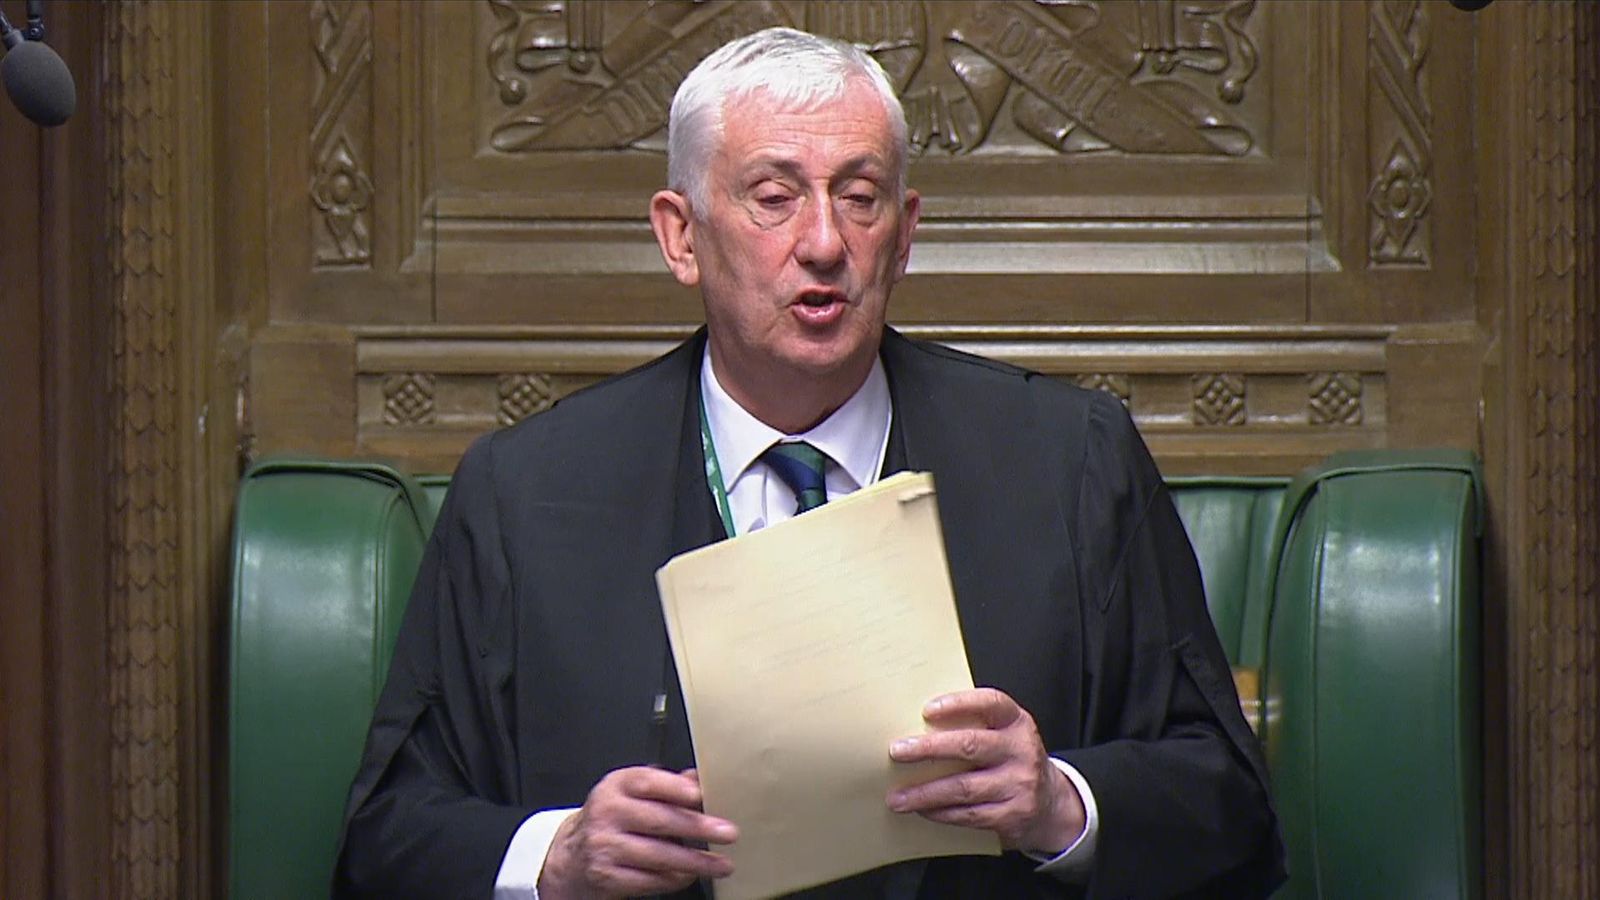 Emotional Speaker Sir Lindsay Hoyle says he is 'guilty of looking after MPs' facing 'frightening' threats